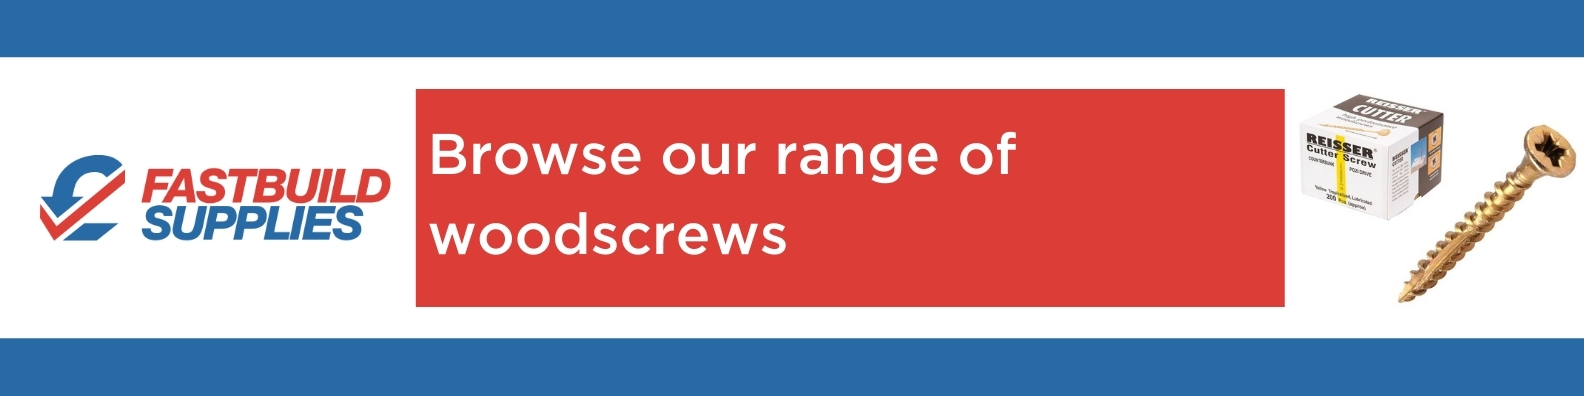 Browse our range of woodscrews